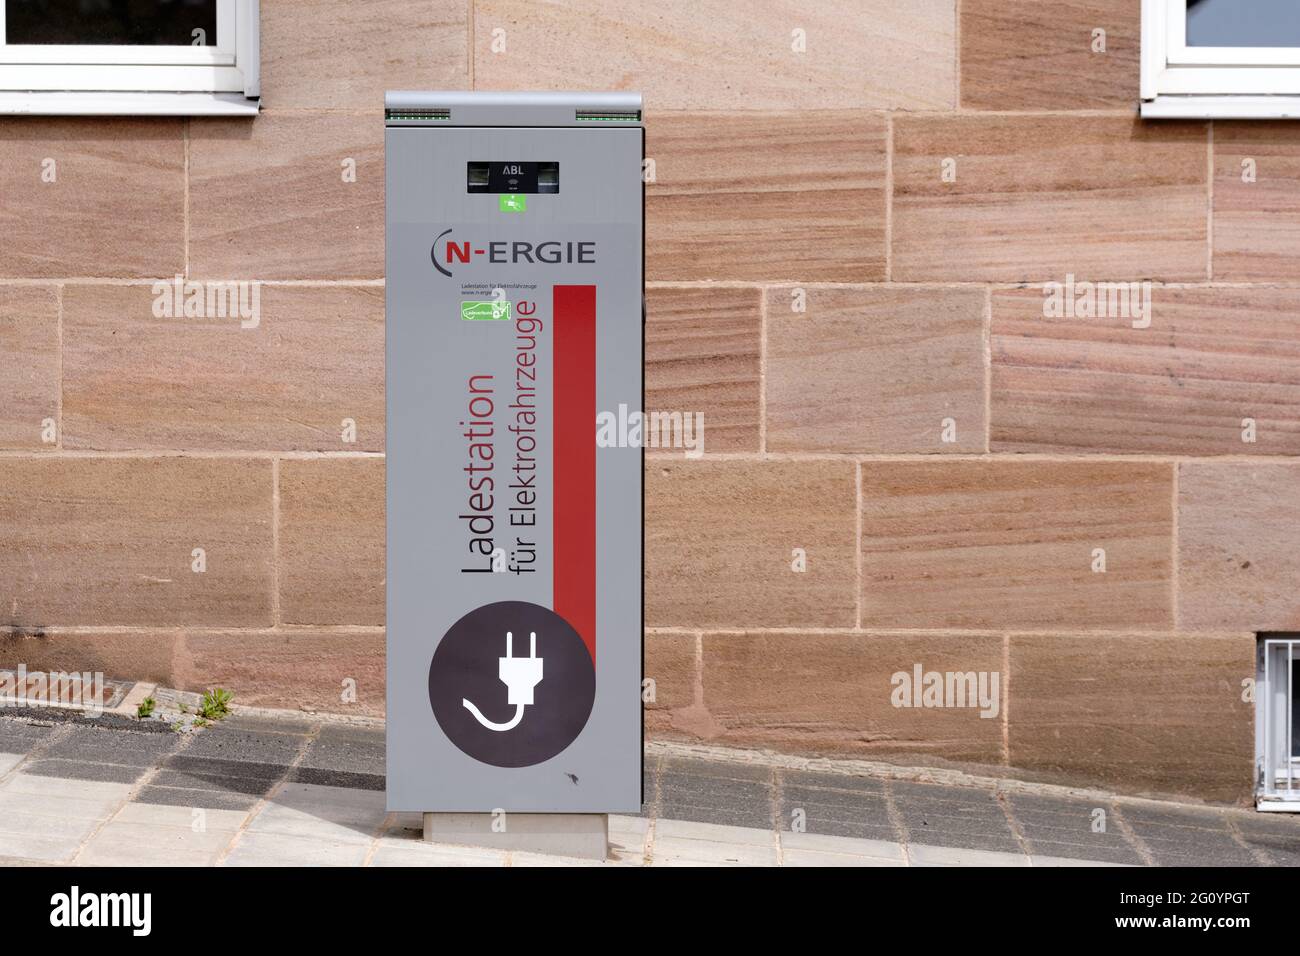 Nuremberg, Germany - May 21, 2021: A Ladestation für Elektrofahrzeuge (charging station for electric cars ) standing in the city  on a pavement in fro Stock Photo